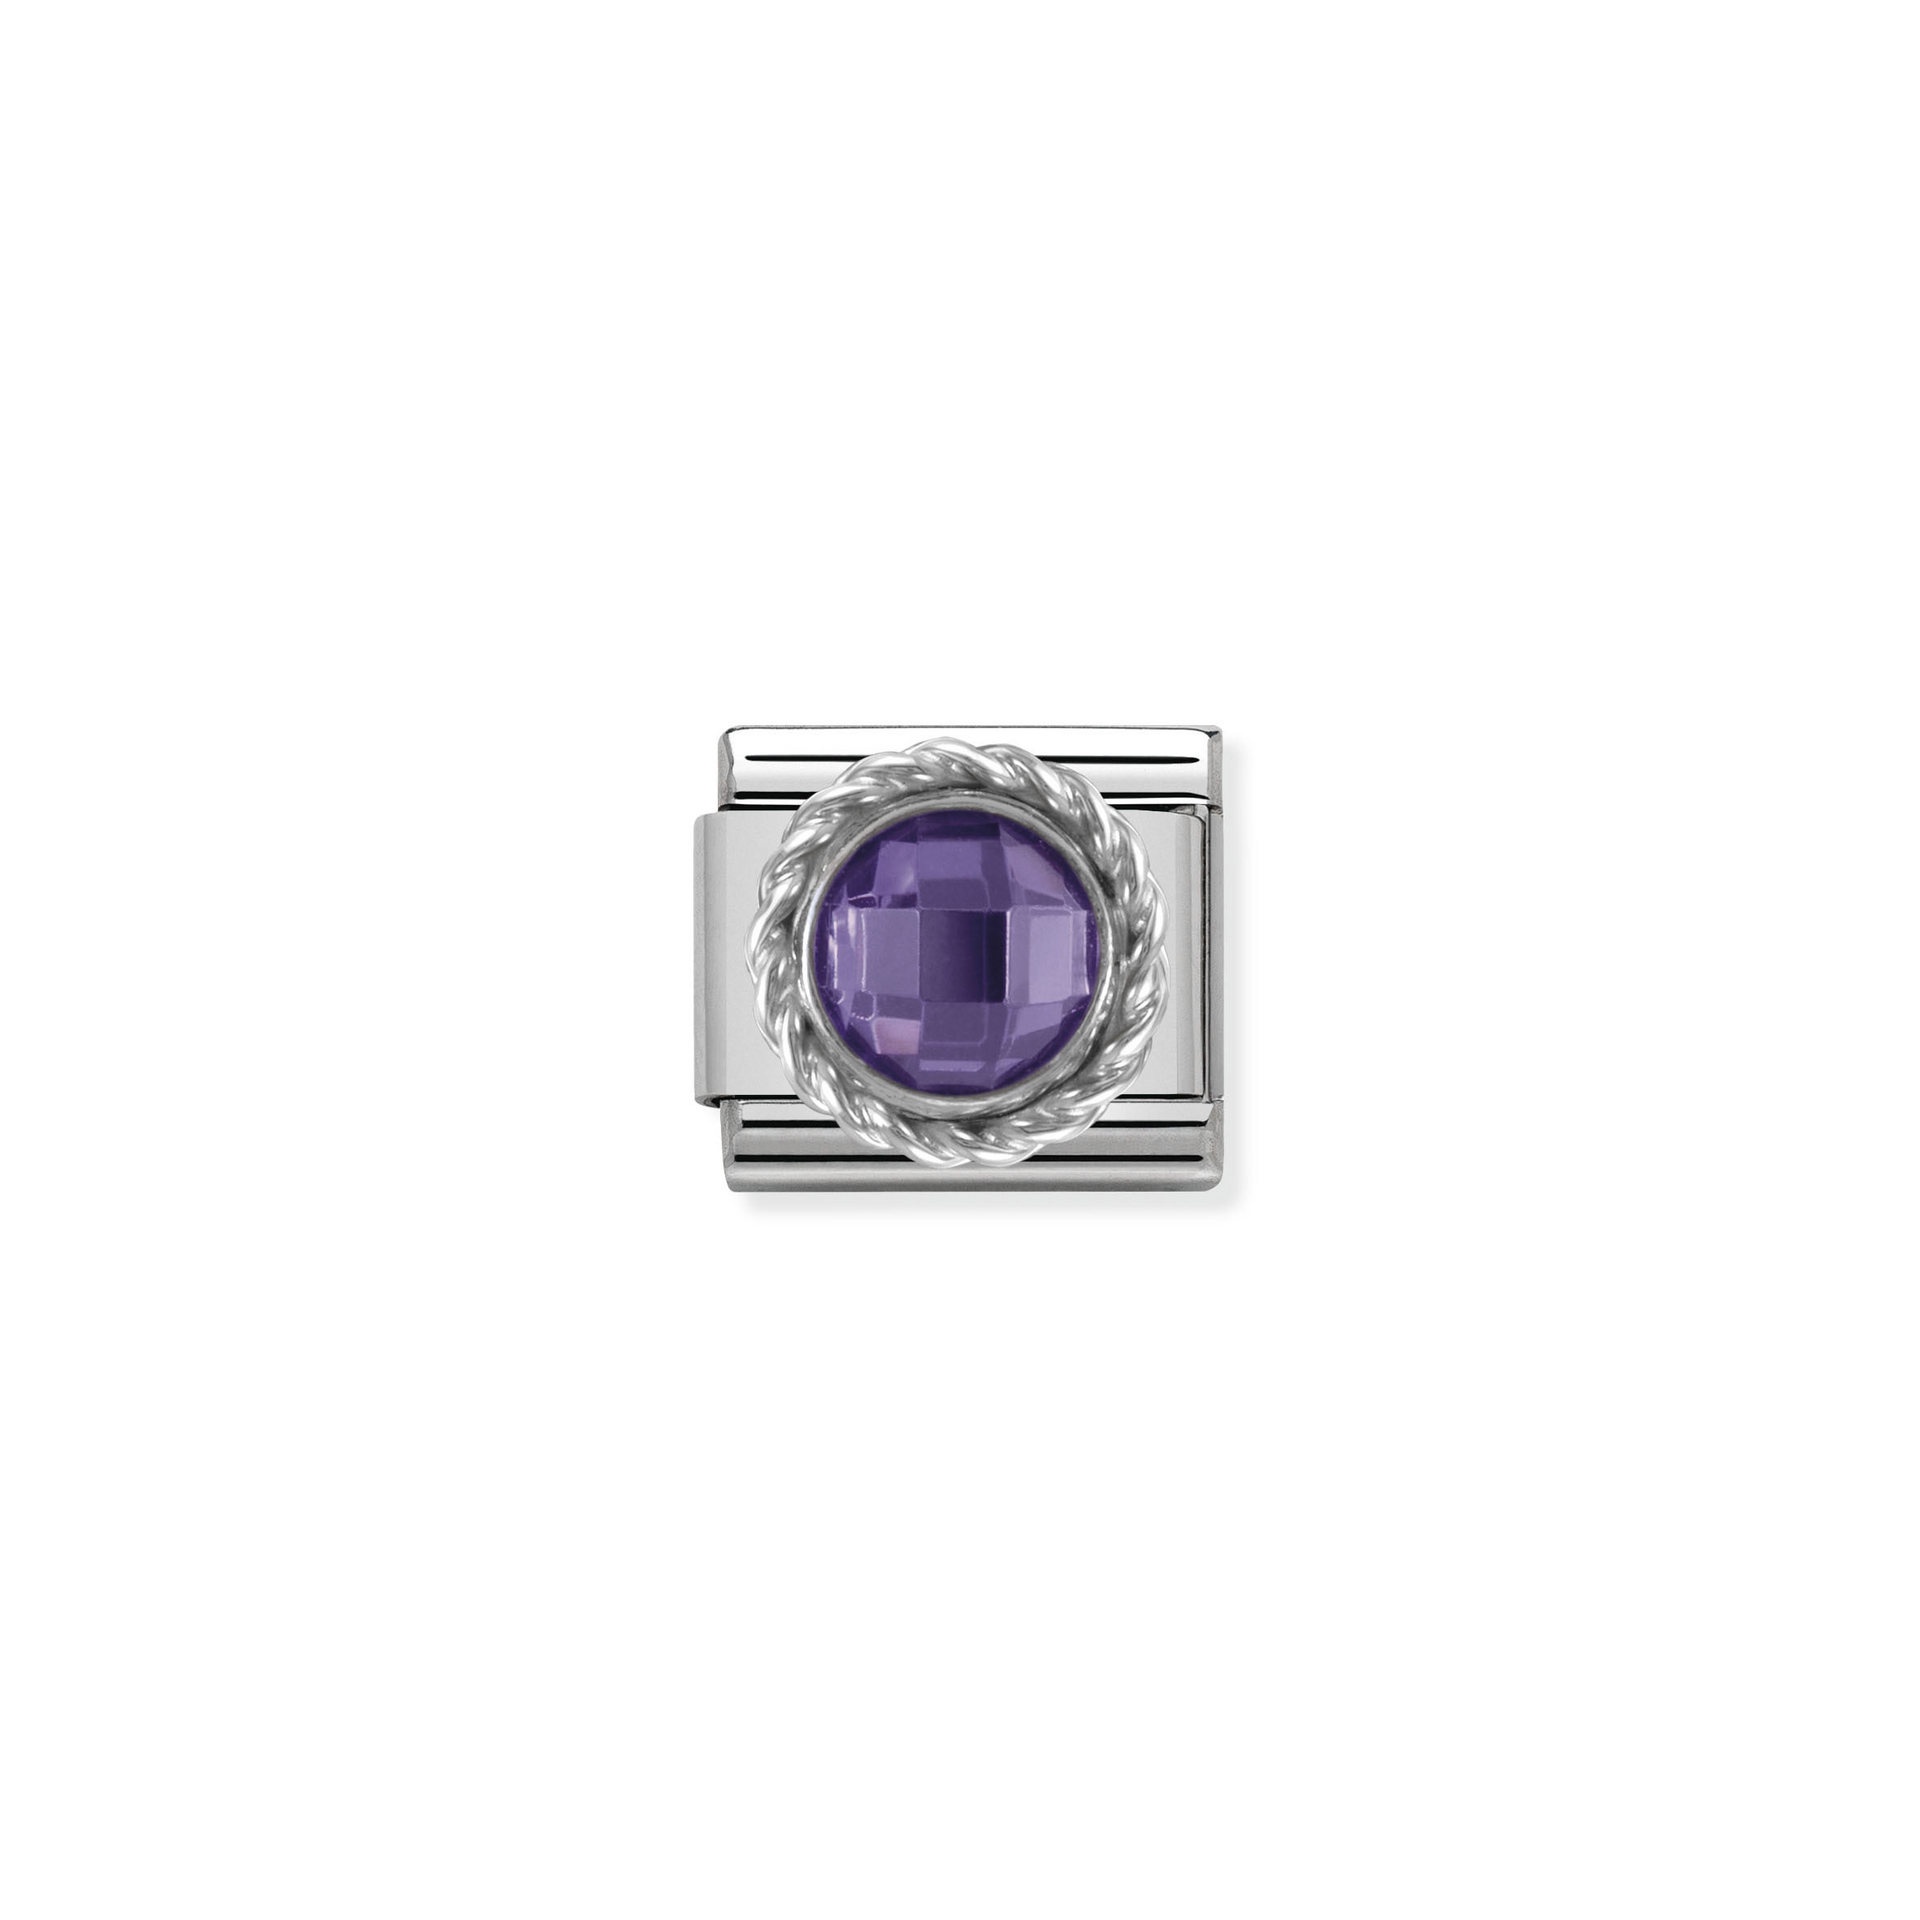 NOMINATION Comp. CL CZ ROUND FACETED STONES stainless steel and twisted 925 silver detail PURPLE 330601_001